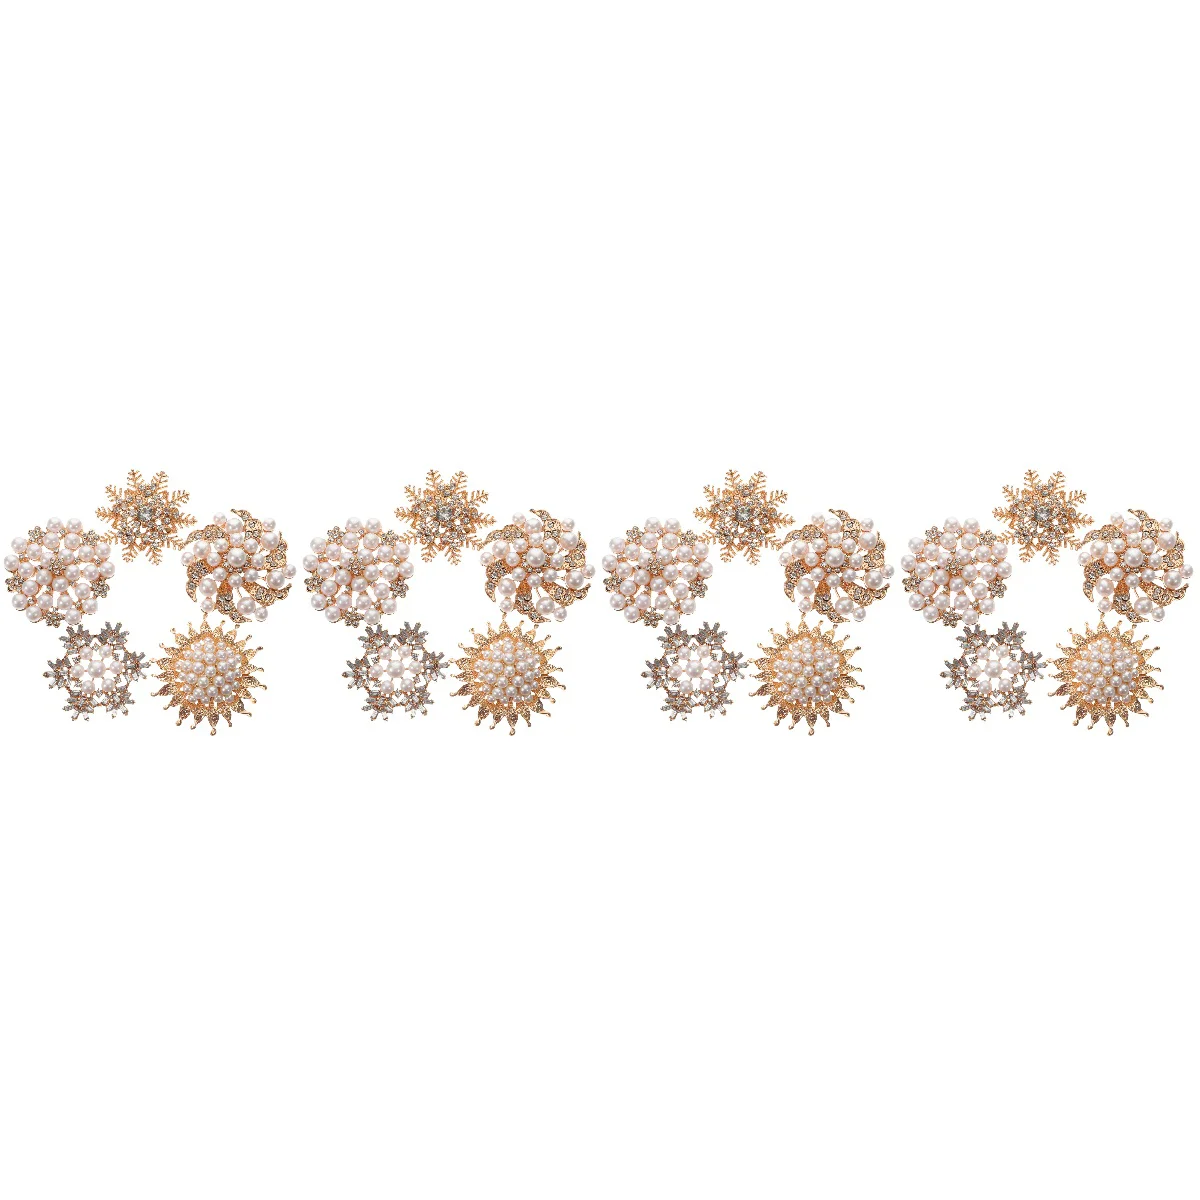 

Diamond Buckle DIY Material Clothes Charms Decorative Hairpin Hairpins Bag Pearl Studded Rhinestone Decors